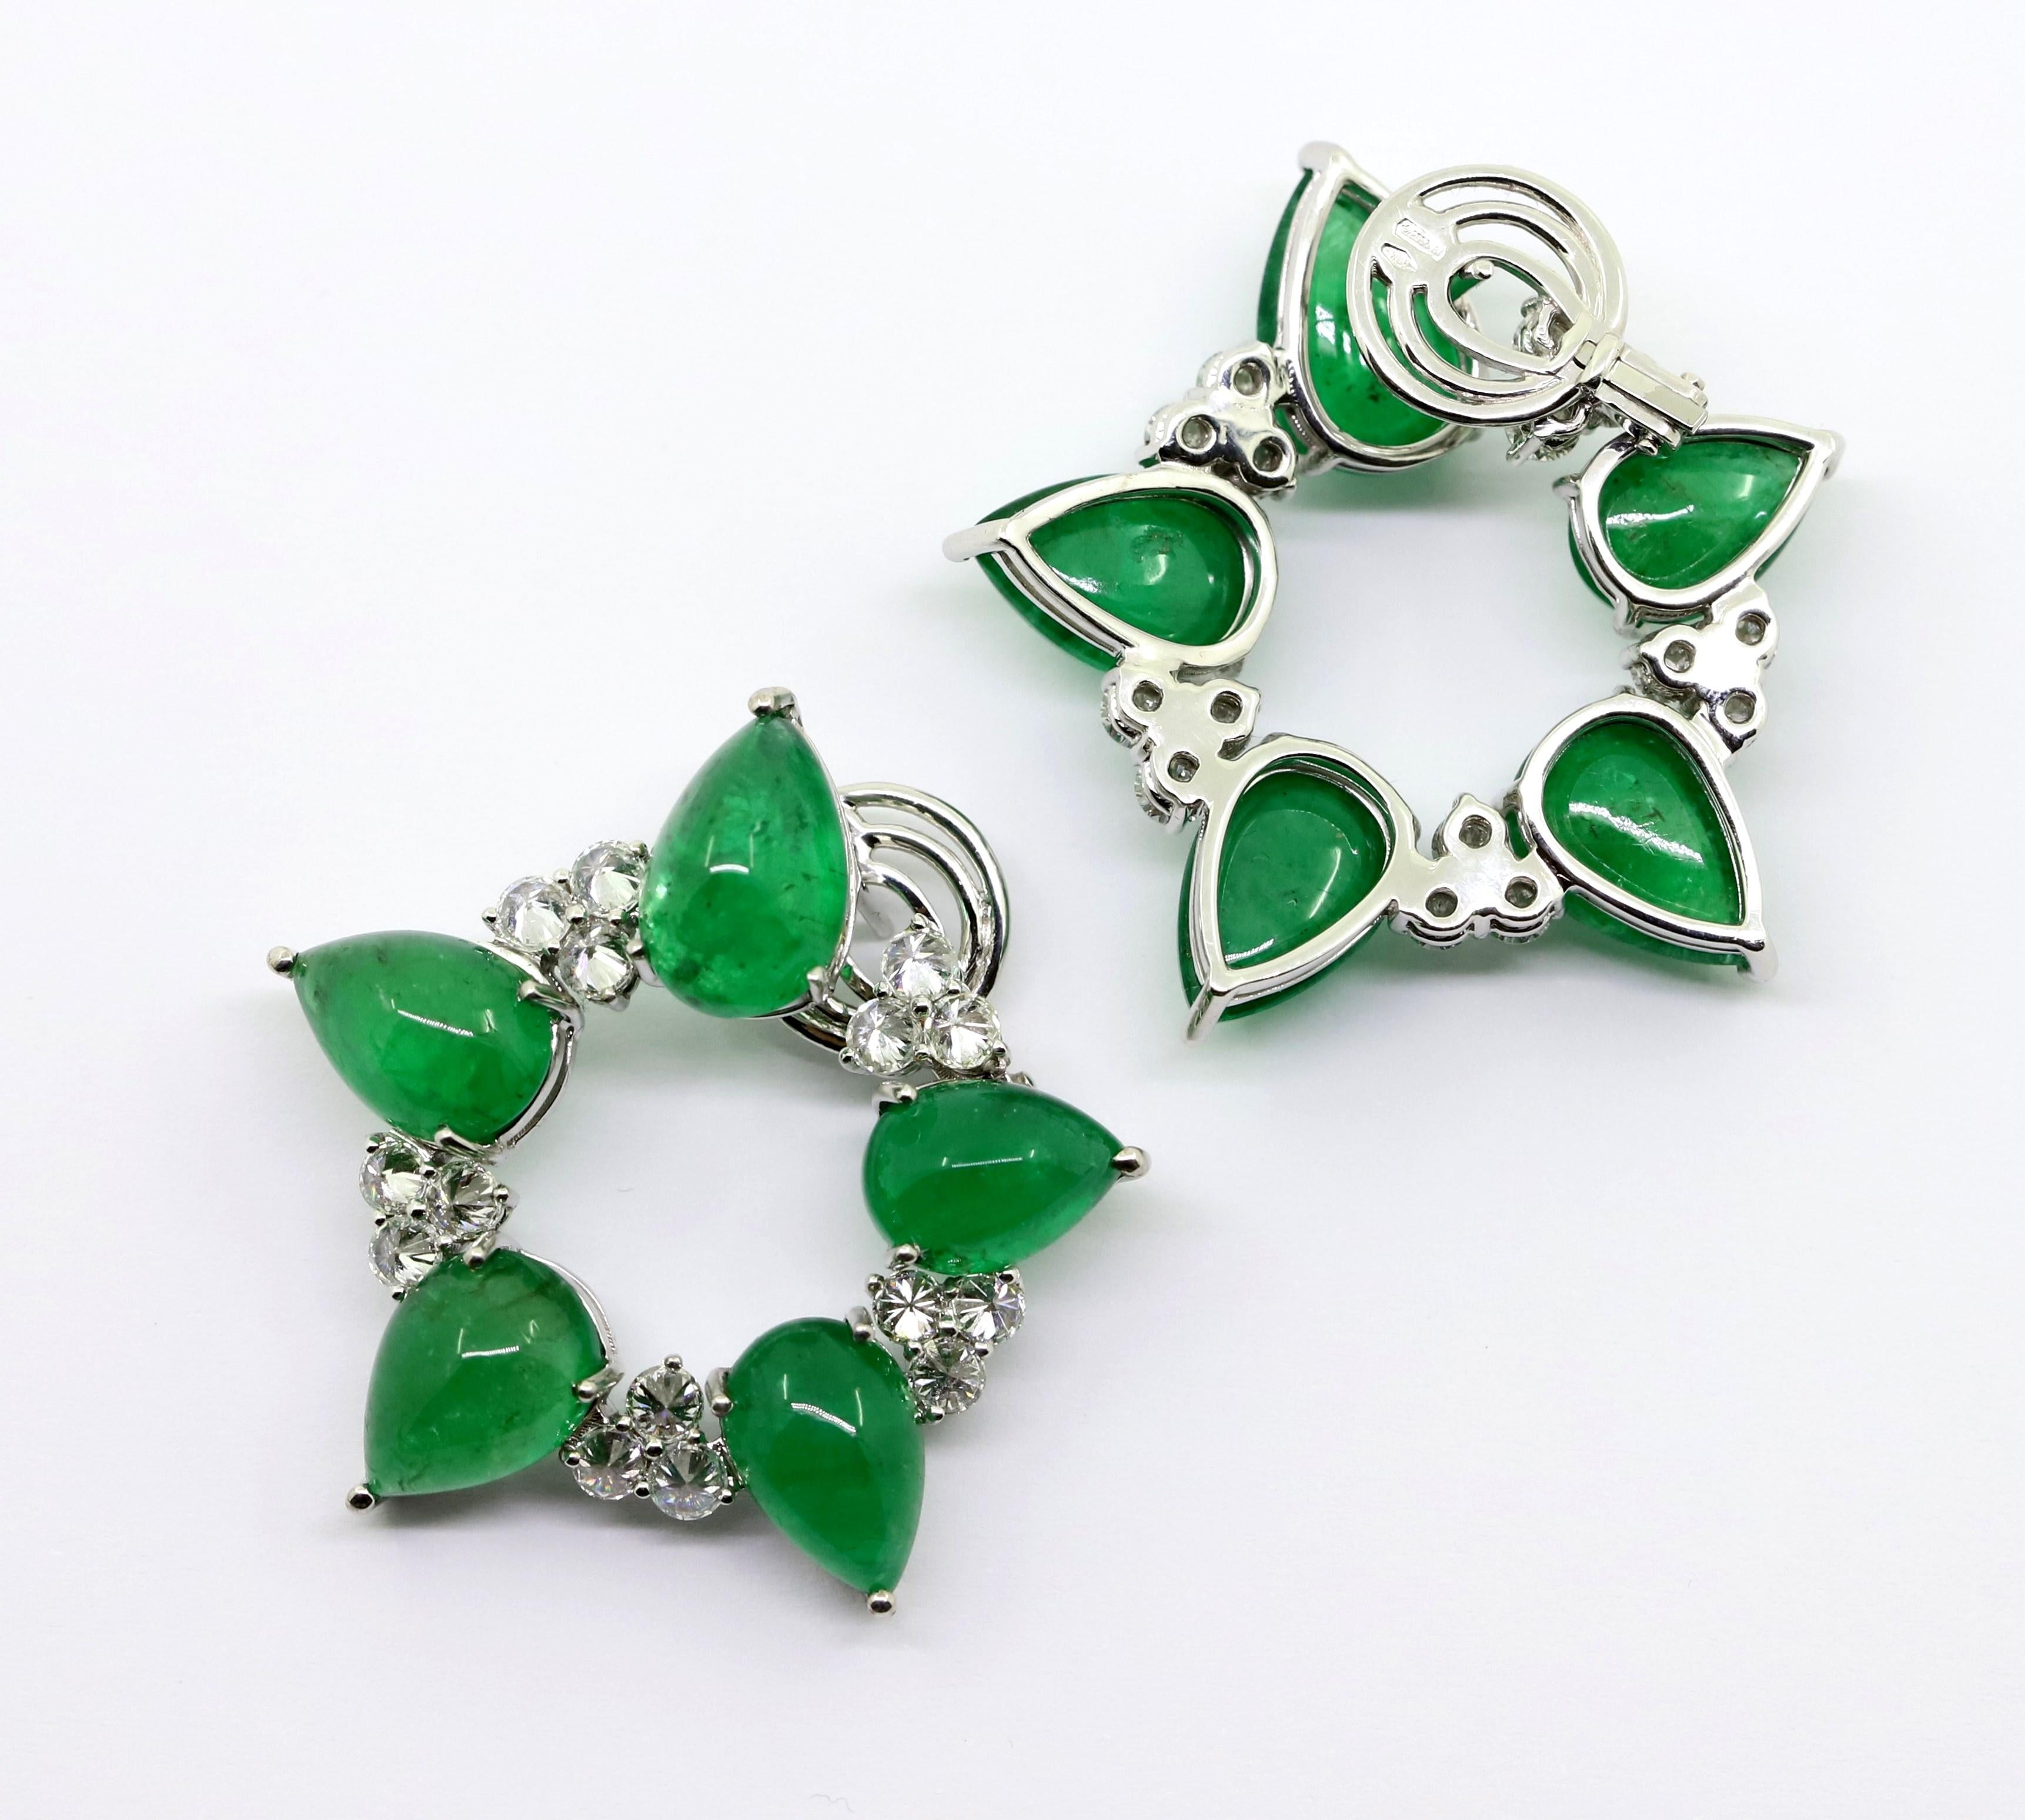 A stars in green! 
5 drop cut emerald cabochons along with 15 brilliant cut diamonds up-down draw a star.

Object Made in Italy.